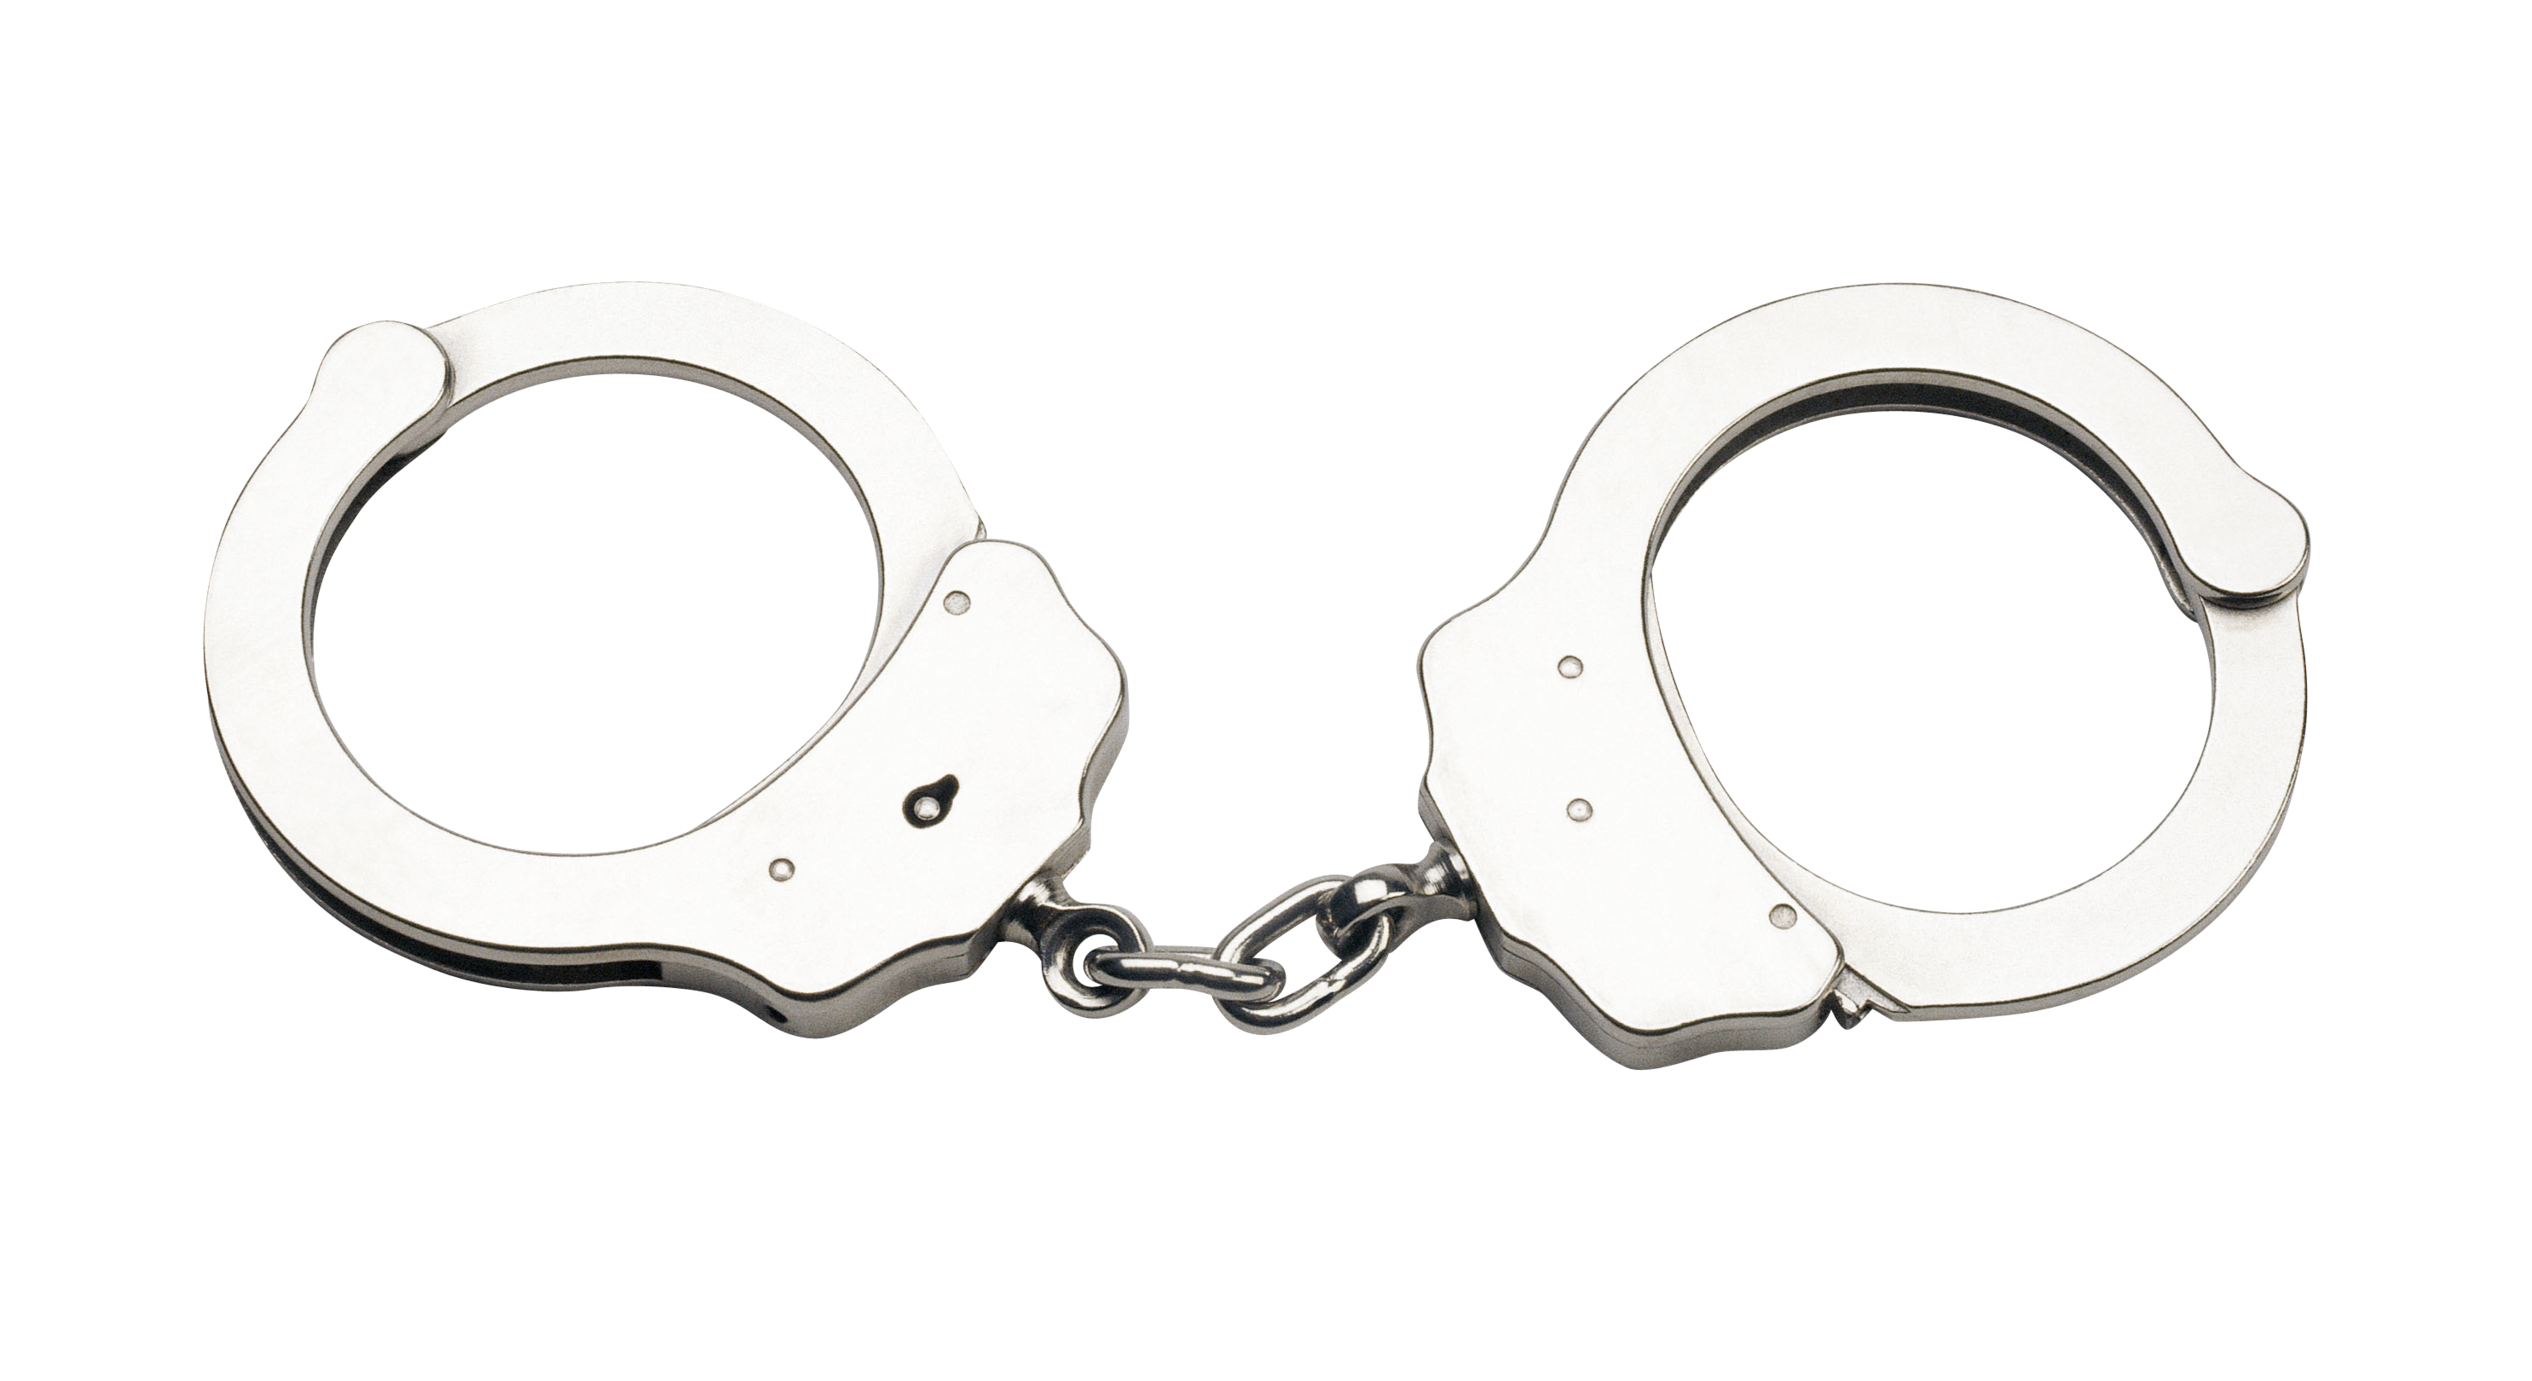 Handcuffs clipart gun. Png images free download